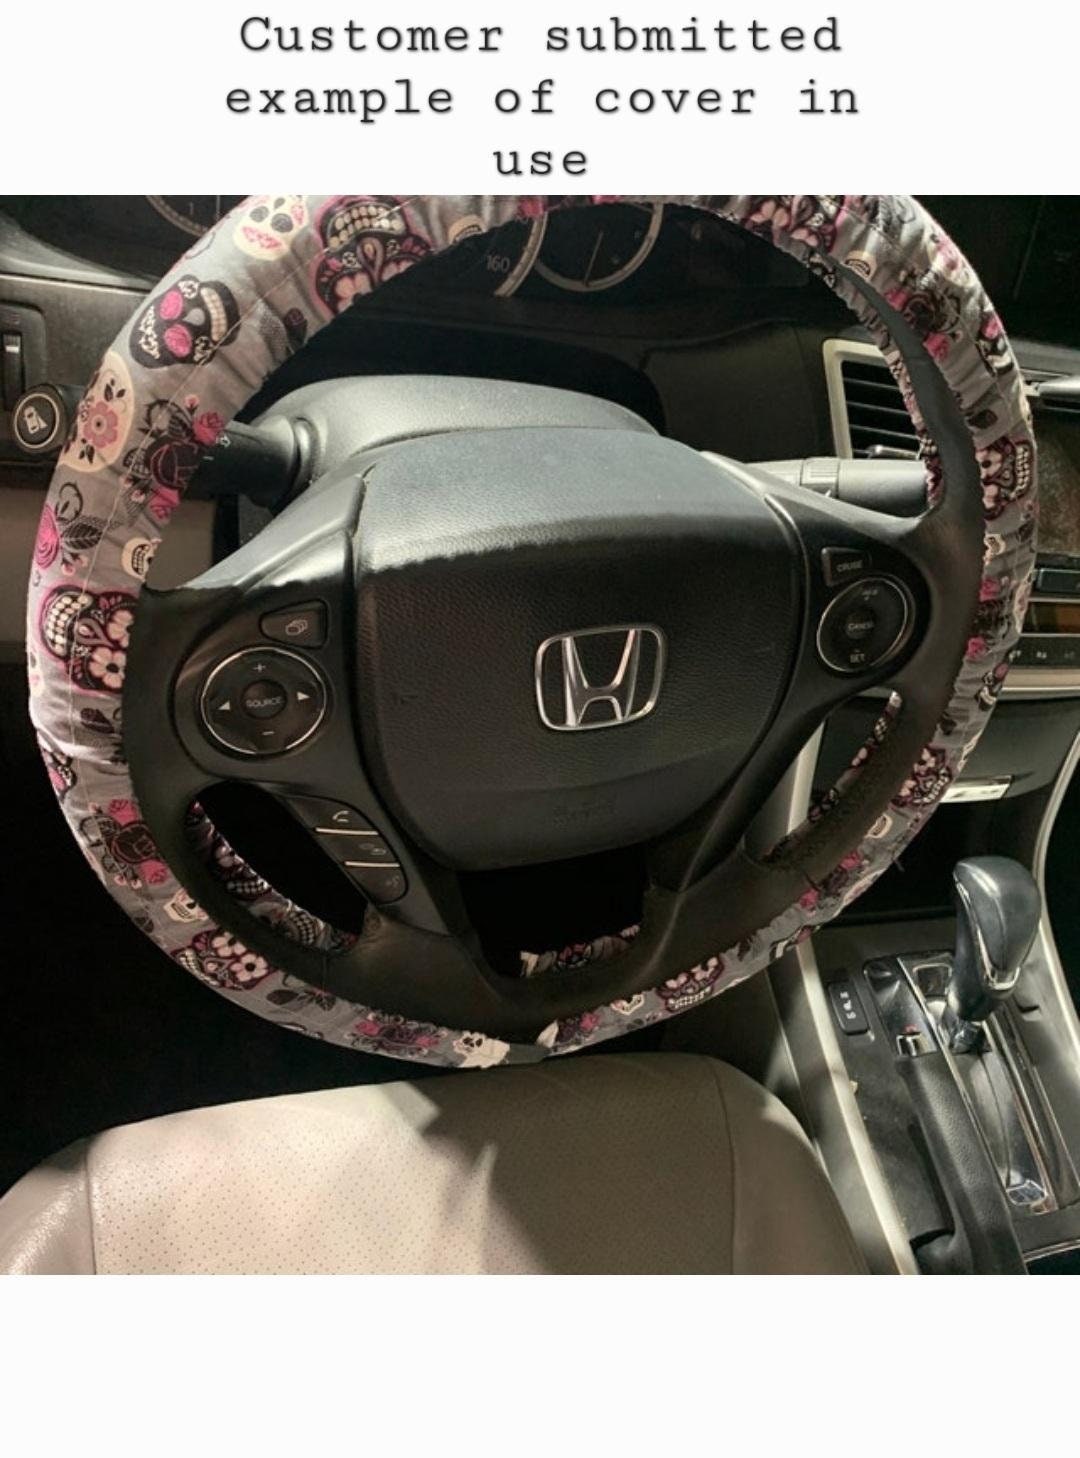 Pineapple Steering Wheel Cover - Harlow's Store and Garden Gifts